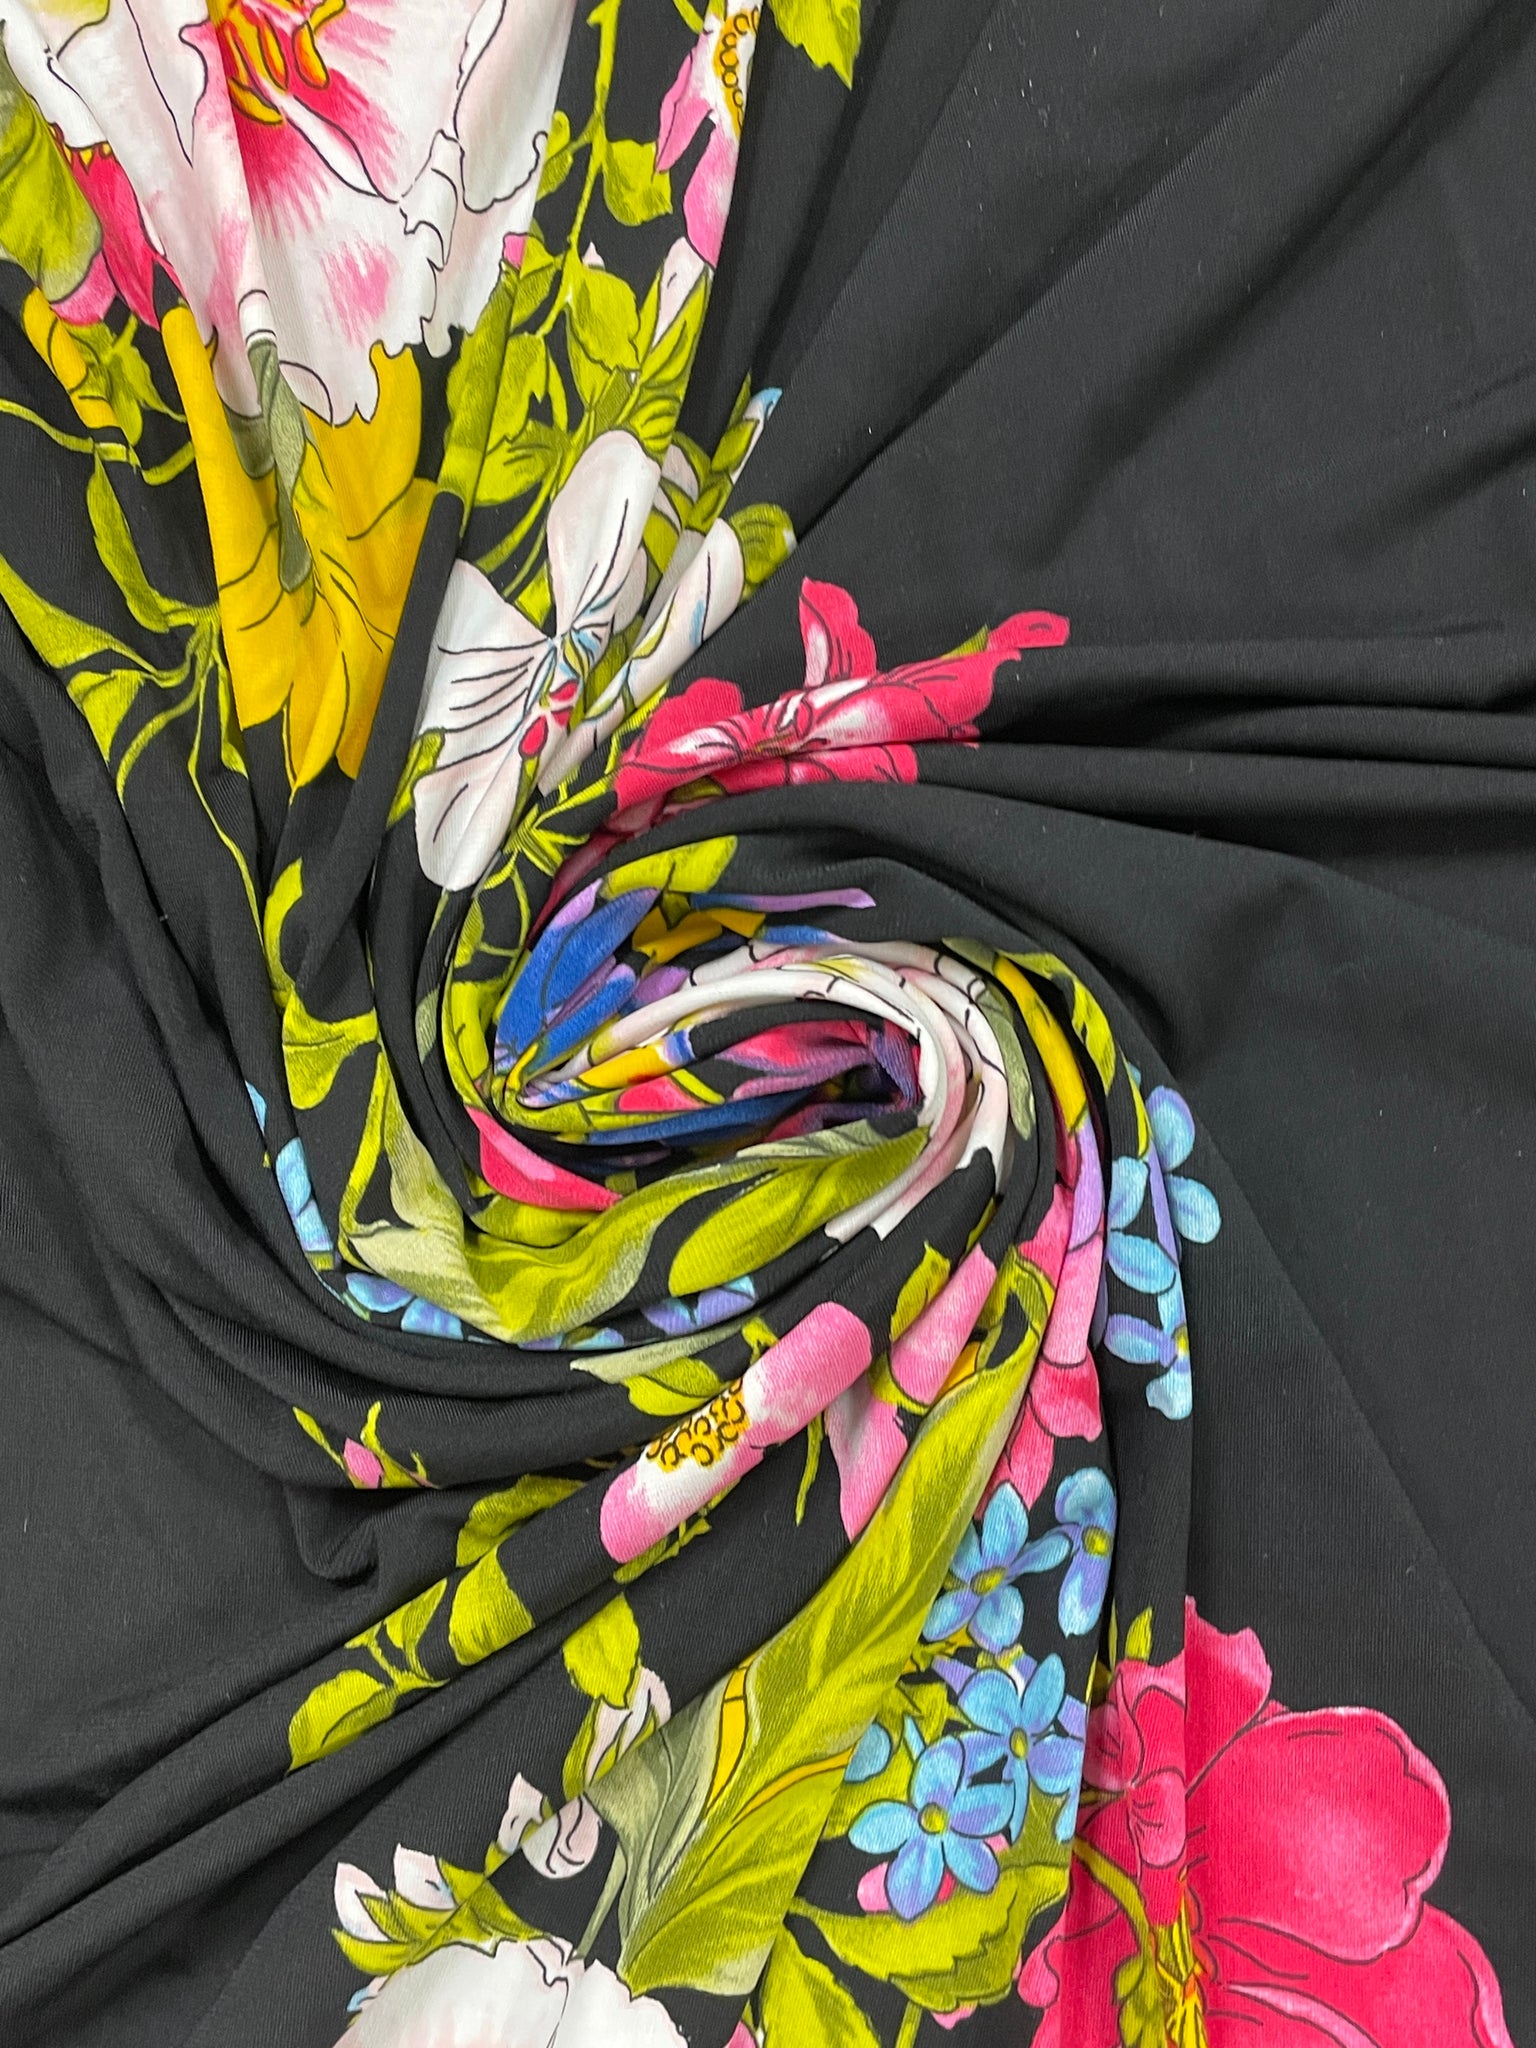 2 YD Nylon Lycra/Spandex - Black with Large Stripe of Flowers Down the Center